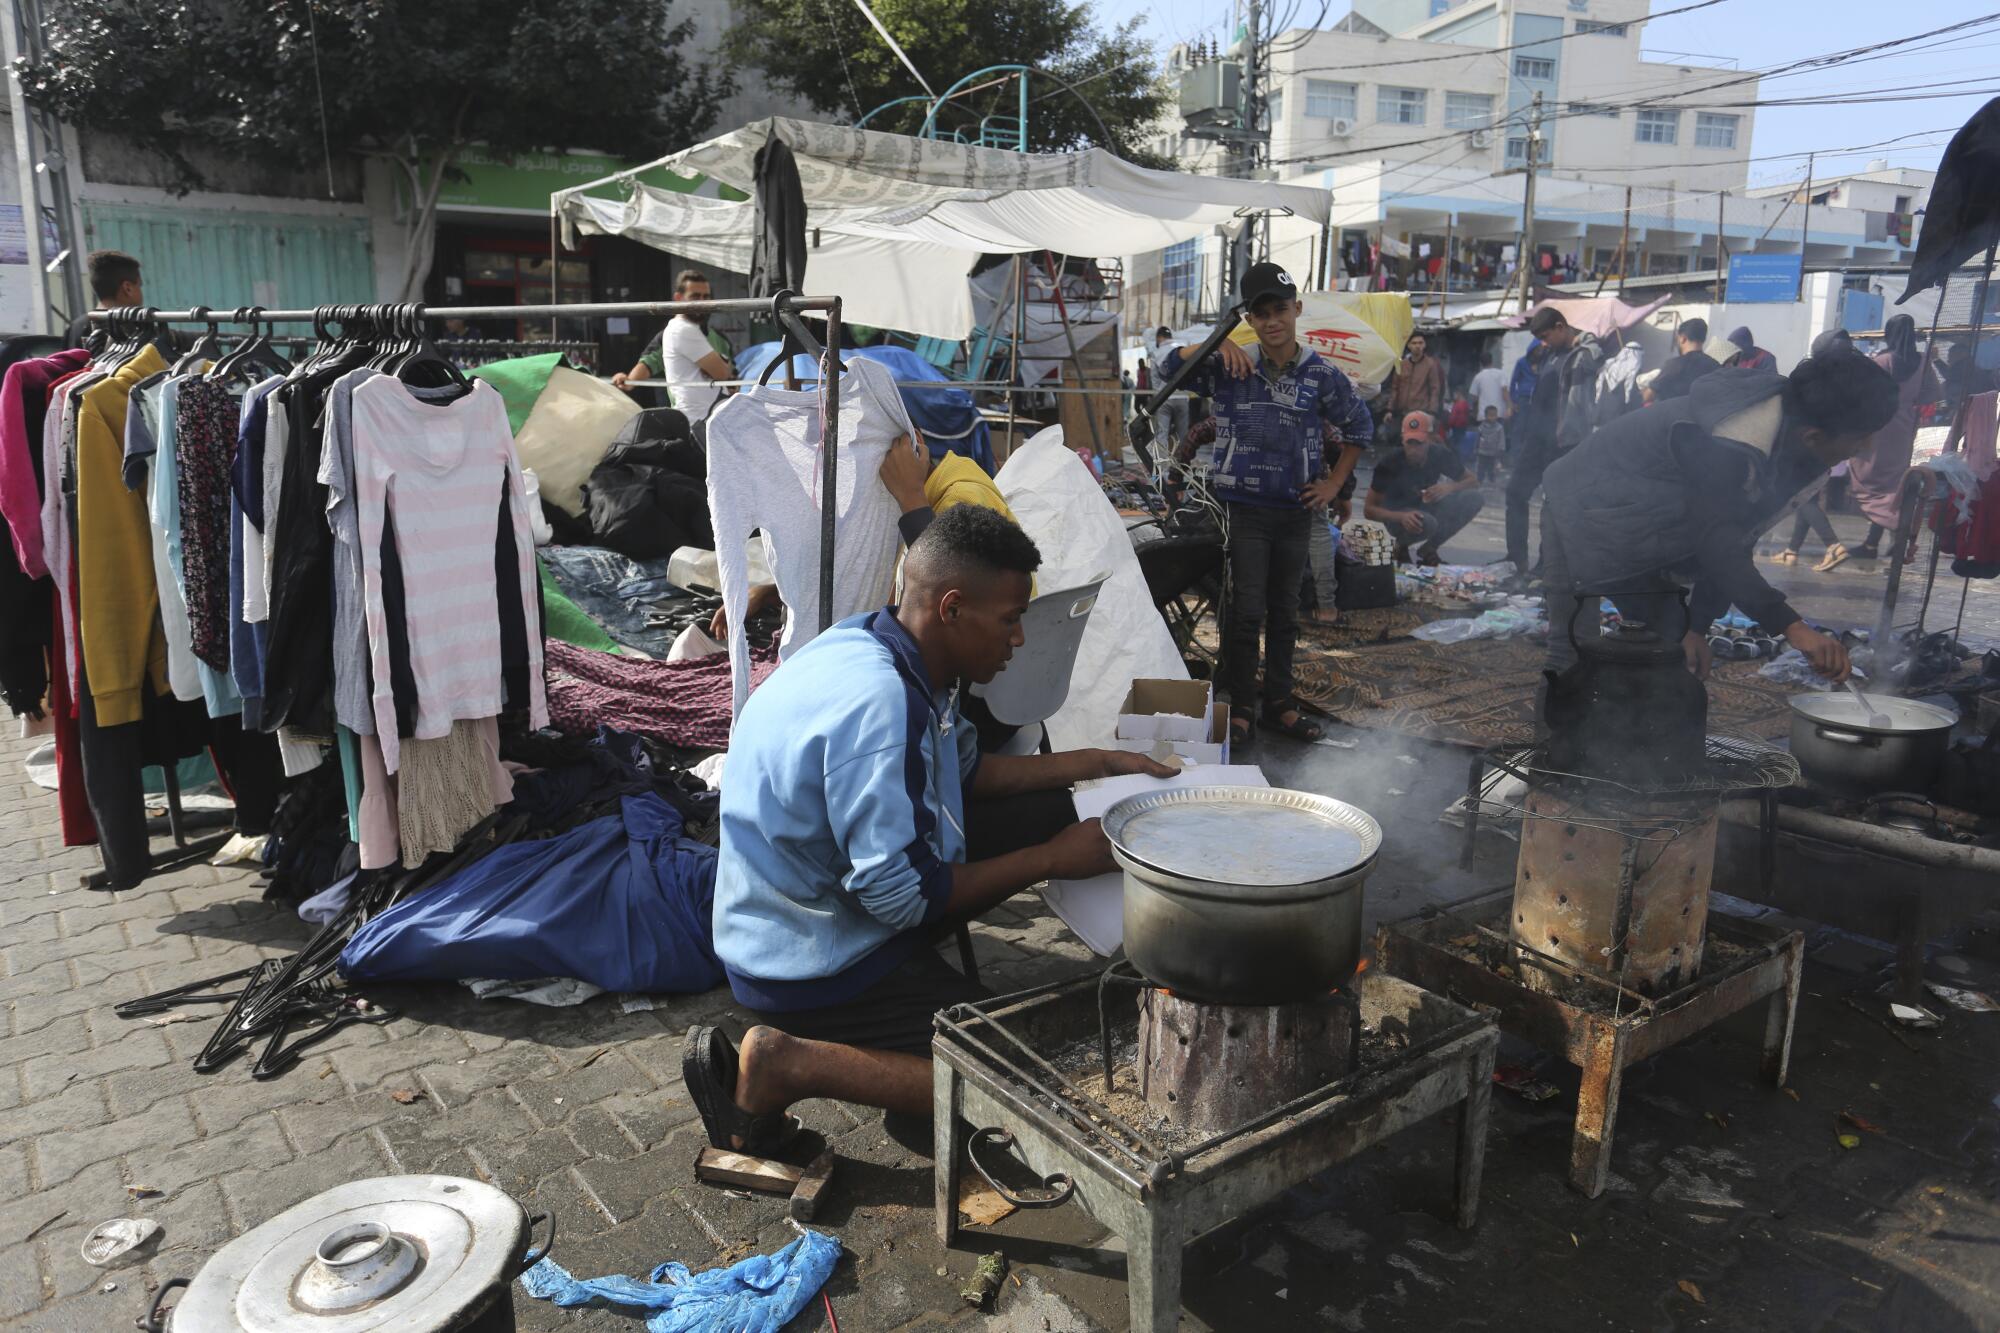 People cooking outside in a square in Rafah, in the Gaza Strip